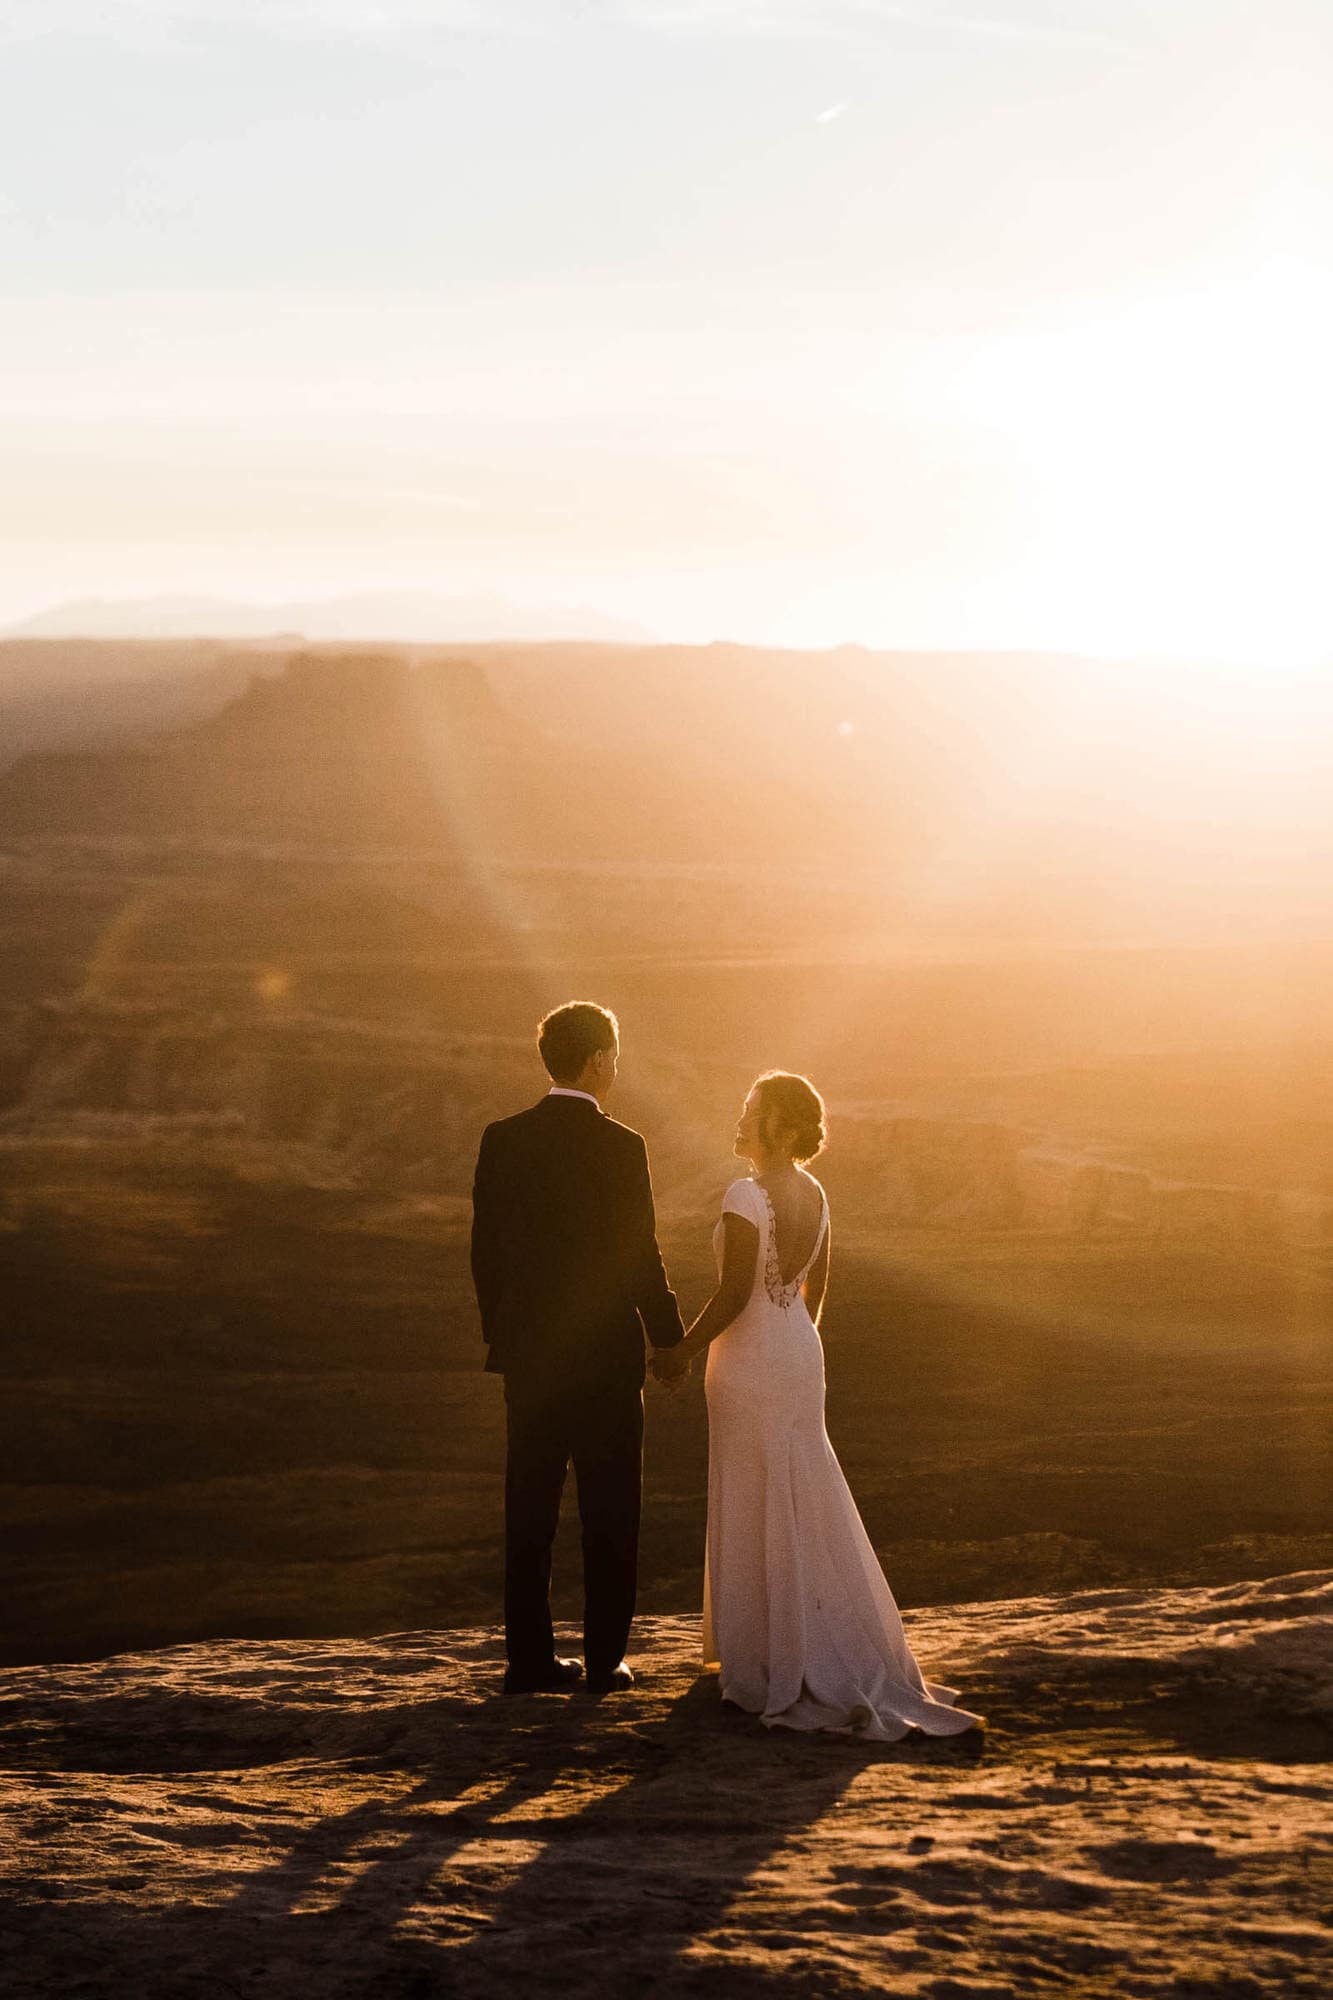 Moab is so the best place for an elopement. Check out this Moab elopement planning guide for all the info you'll need to plan your elopement adventure. 